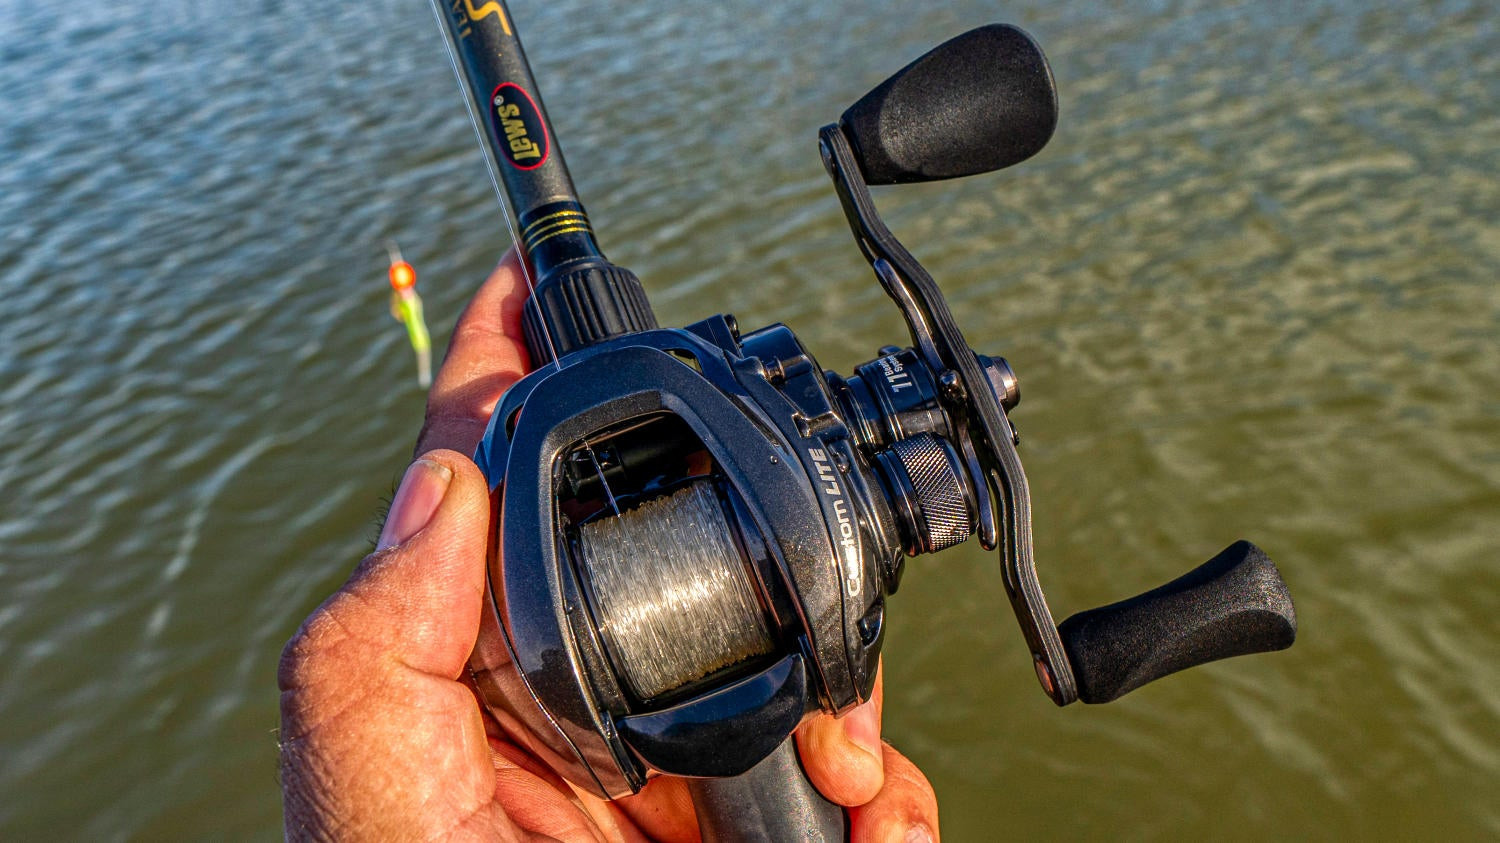 Lews Reel Parts - Fishing Rods, Reels, Line, and Knots - Bass